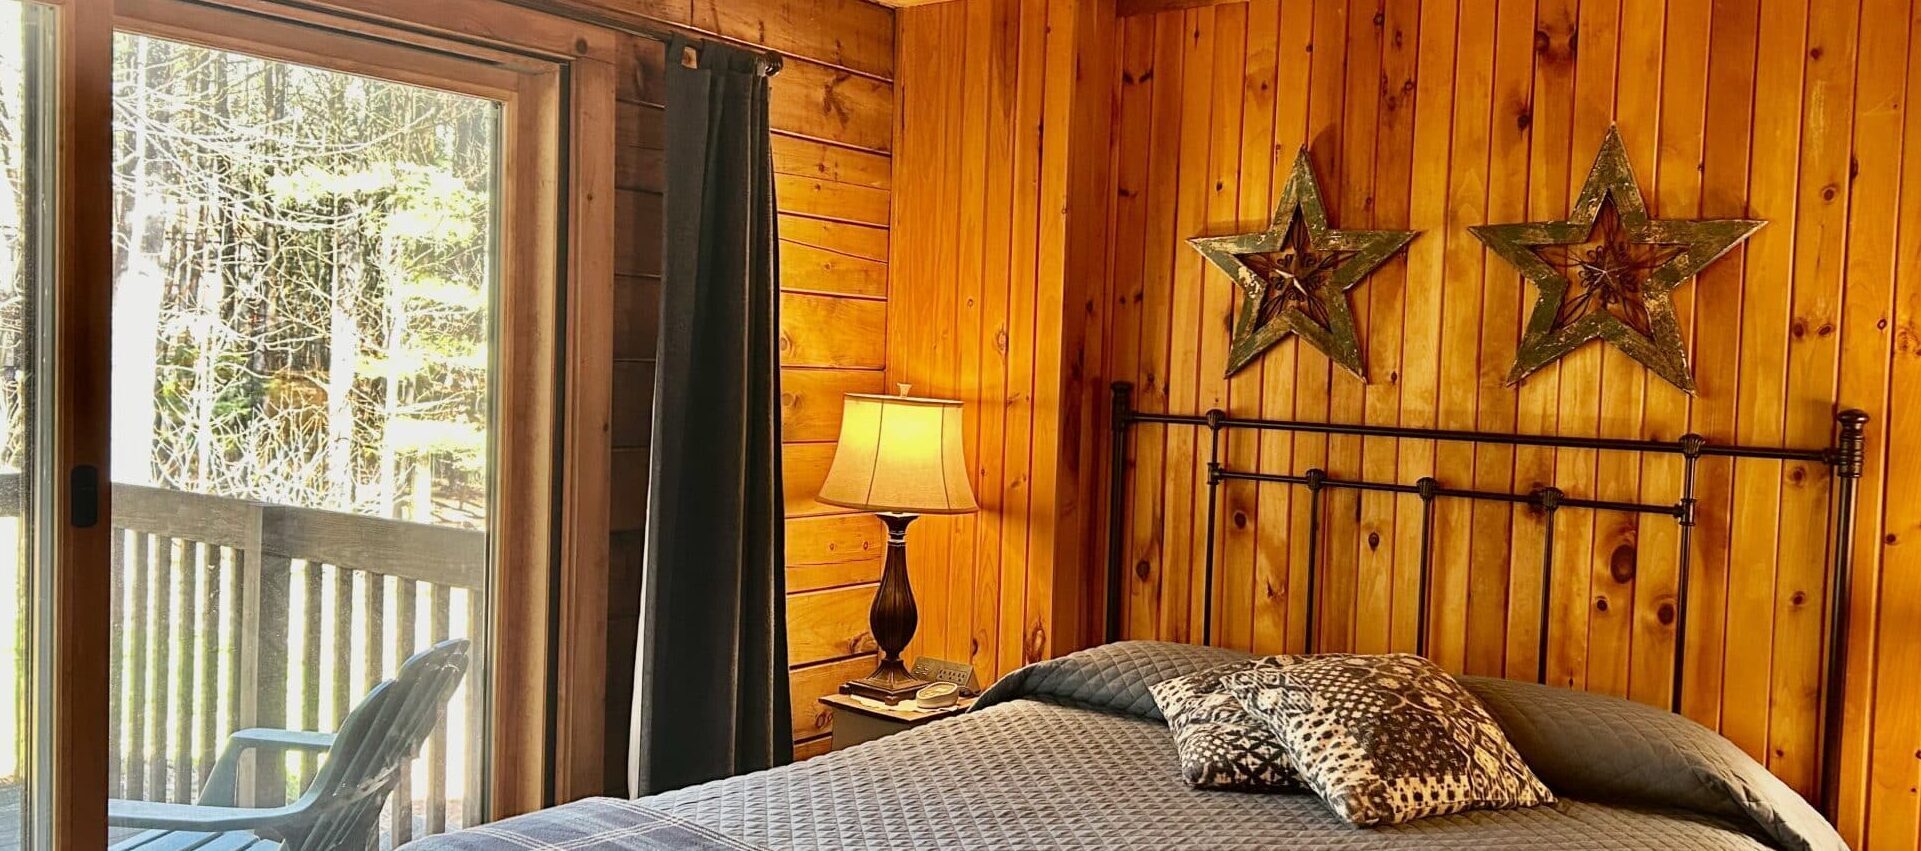 The Everett Room with Queen size bed and nightstand with lamp.  Looking out glass door into forest.